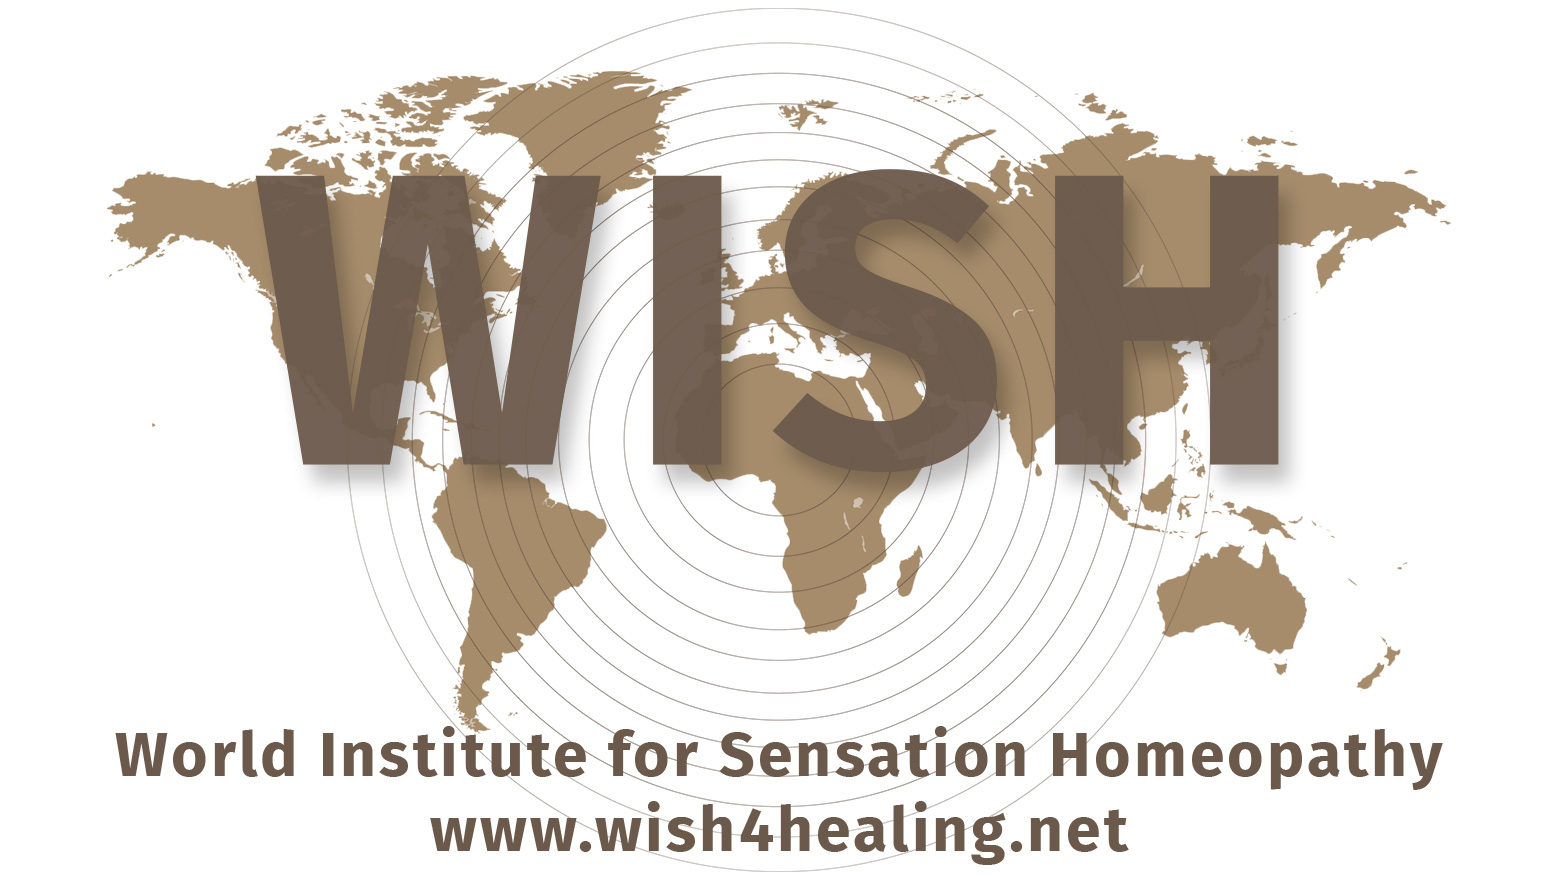 World Institute for Sensation Homeopathy